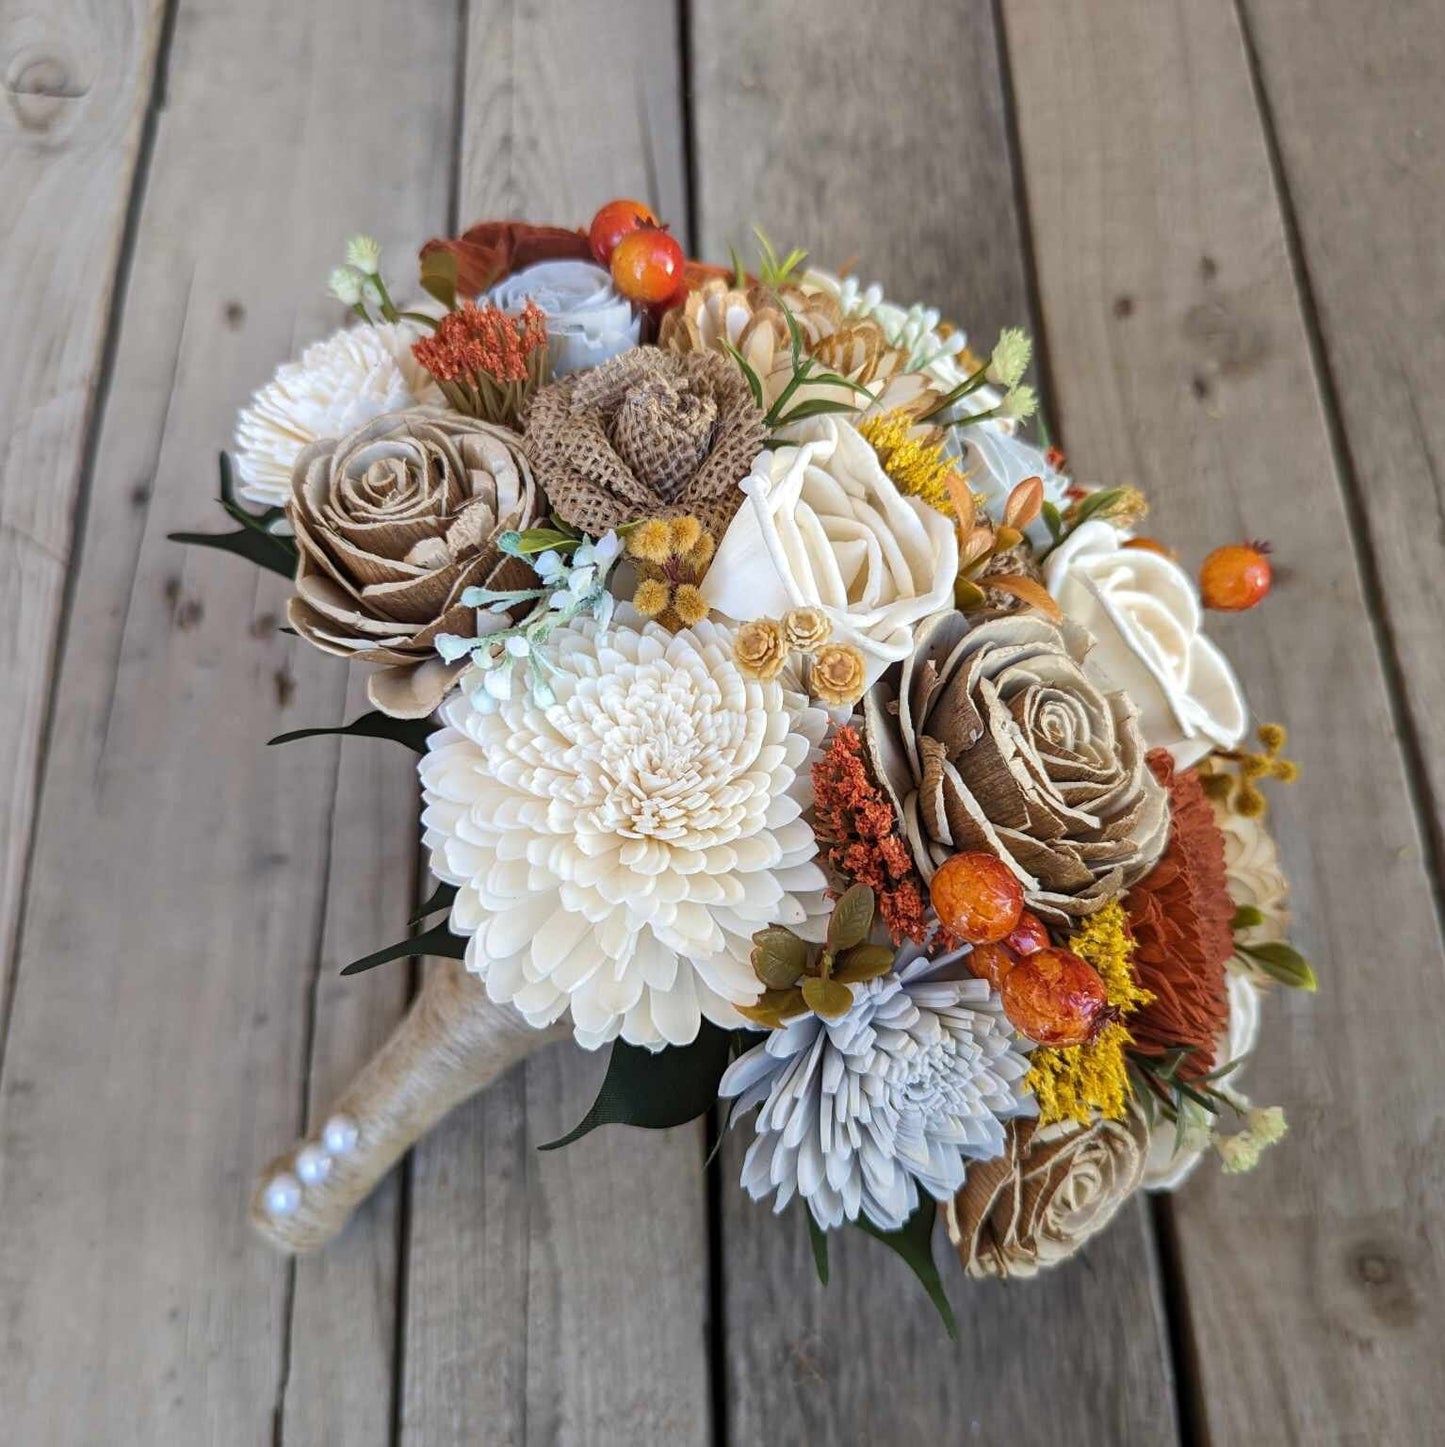 Fall Wedding Bouquet with Sola Wood Flowers, Wood Flower Bridal Bouquet for Bride and Bridesmaid